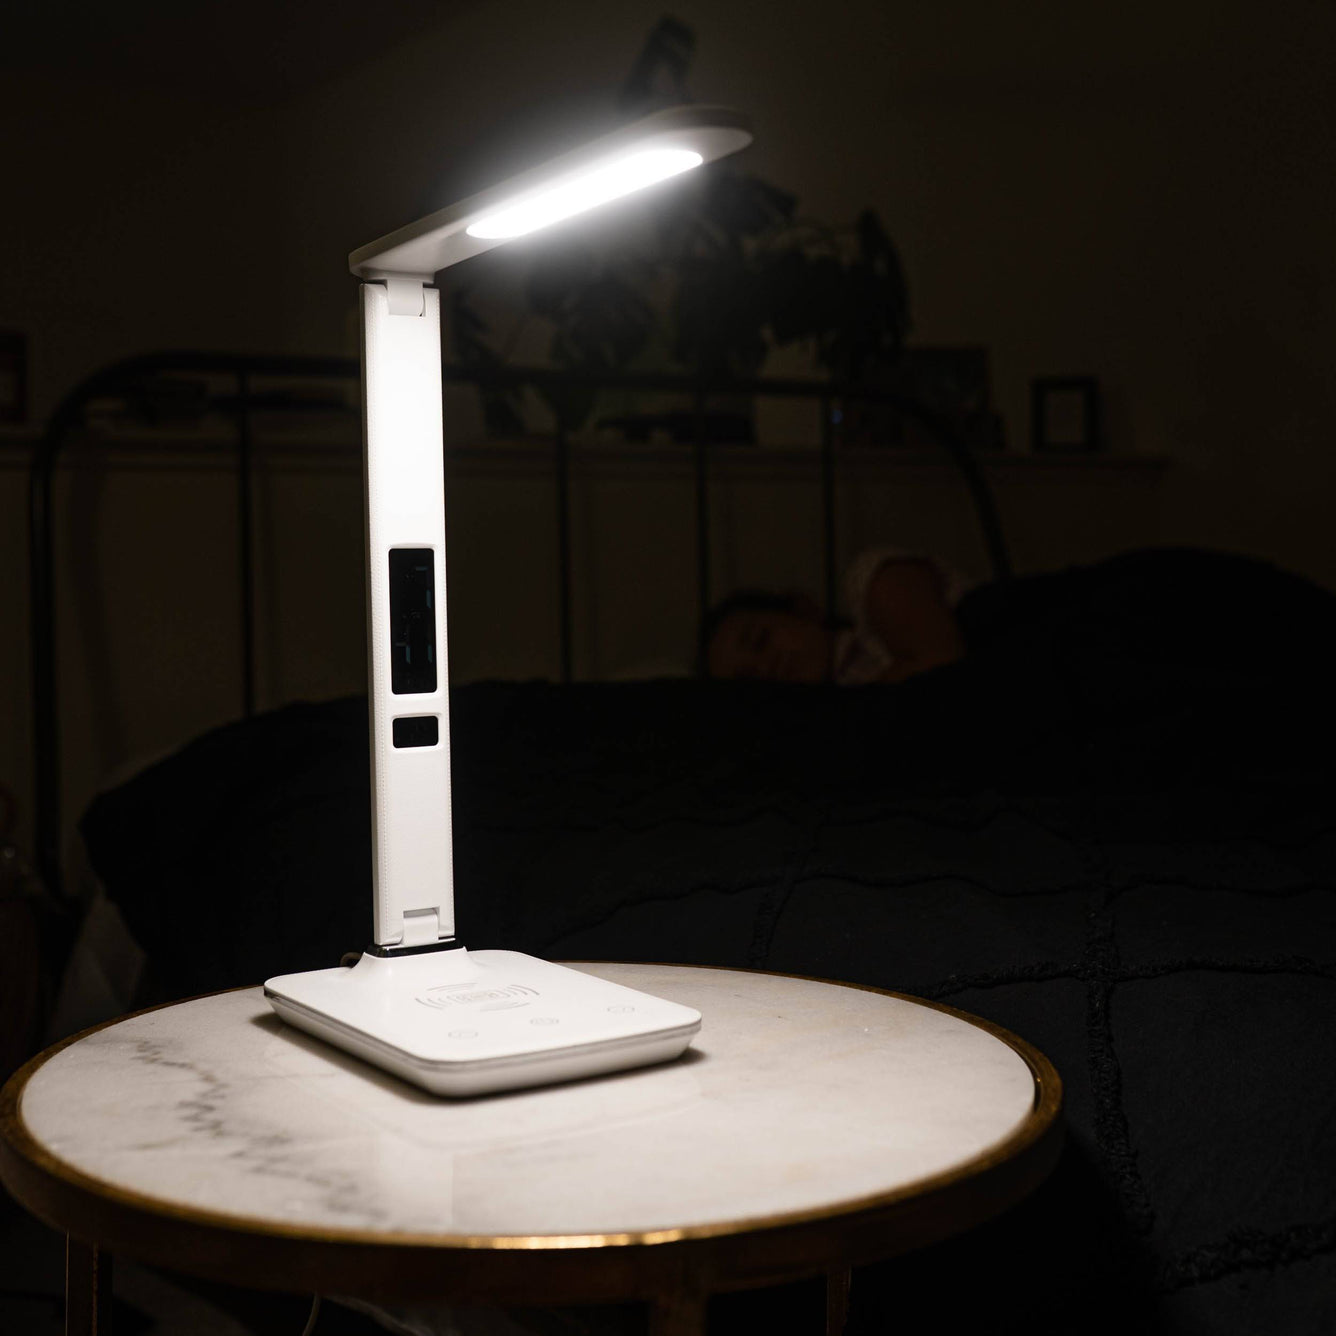 TheraLite Radiance Light Therapy Lamp - Carex Health Brands